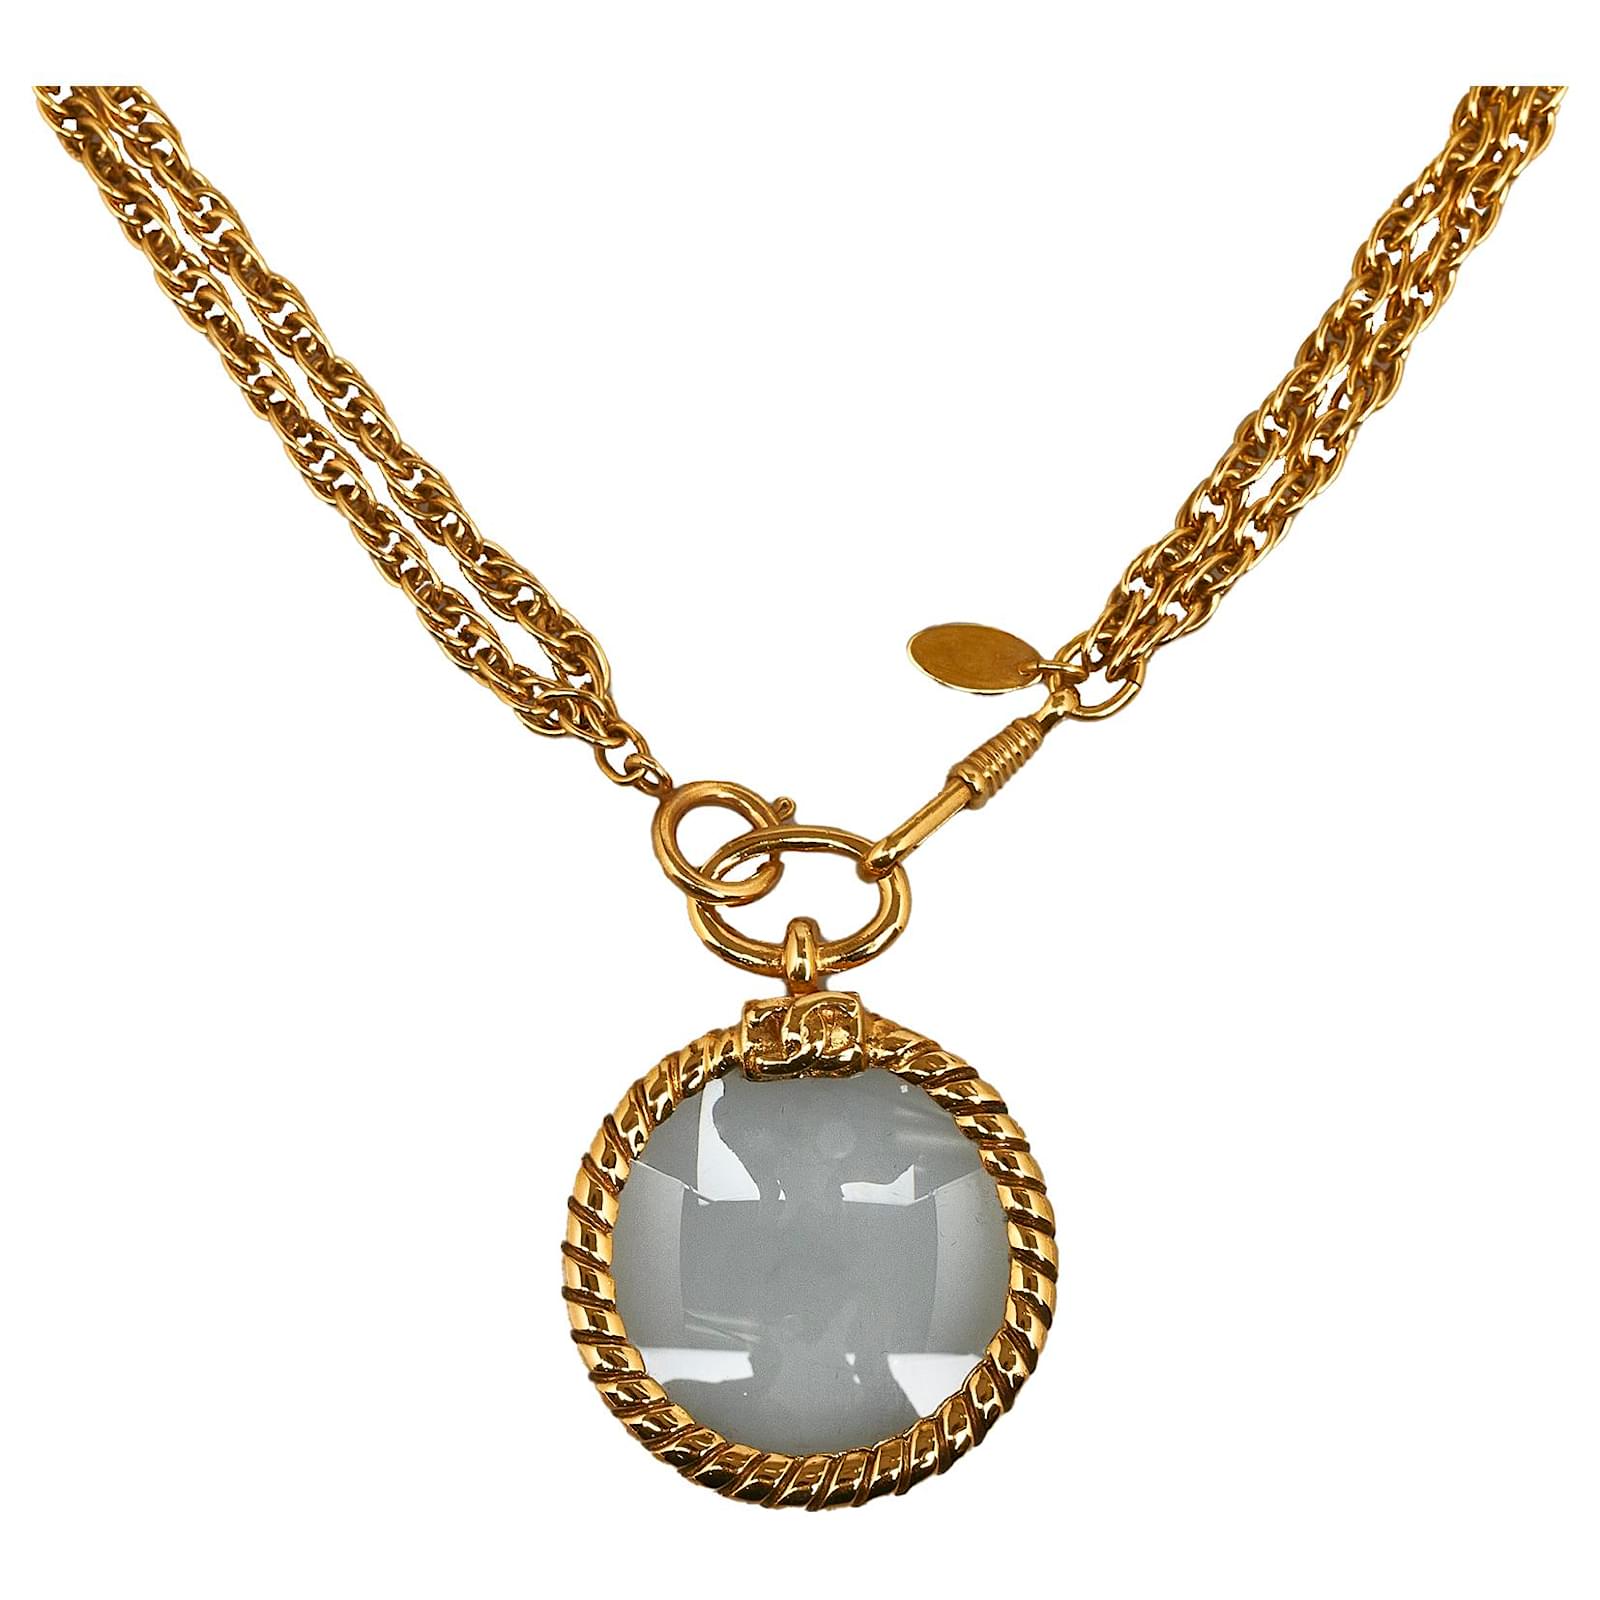 Chanel Strass CC Pendant Necklace - Gold-Plated Pendant Necklace